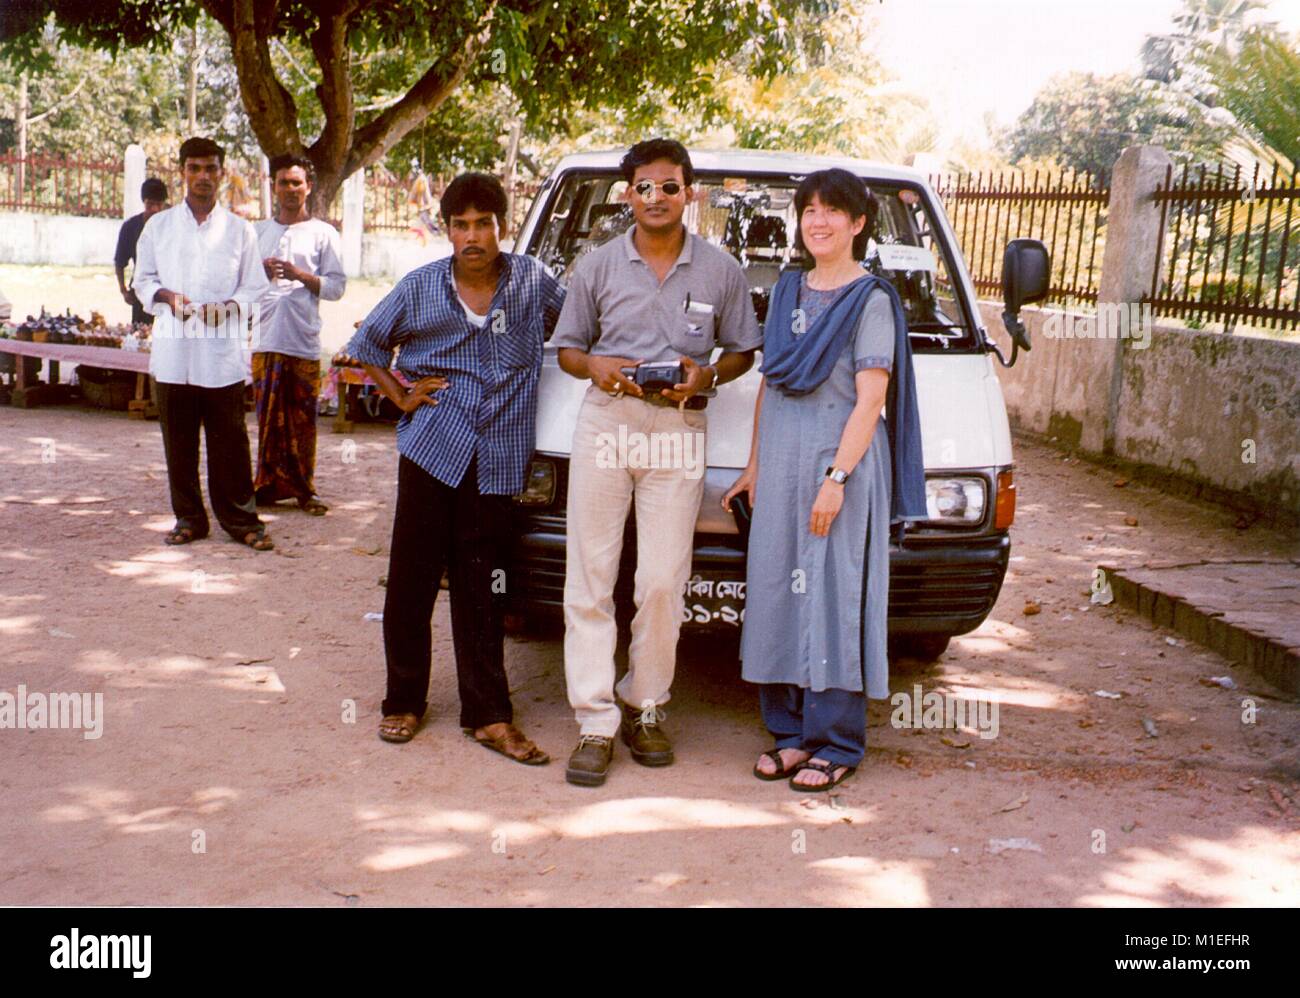 Photograph of Dr. Badrul Munir Sohel (WHO) and Dr. Pamela Ching (CDC) posing in front of a van among locals in a rural area in the Rajshahi Division of Bangladesh, during a surveillance stage of AFP (Acute Flaccid Paralysis) cases identification in children, as part of the global resolution to eradicate polio, image courtesy CDC/Dr. Pamela Ching, 1999. () Stock Photo